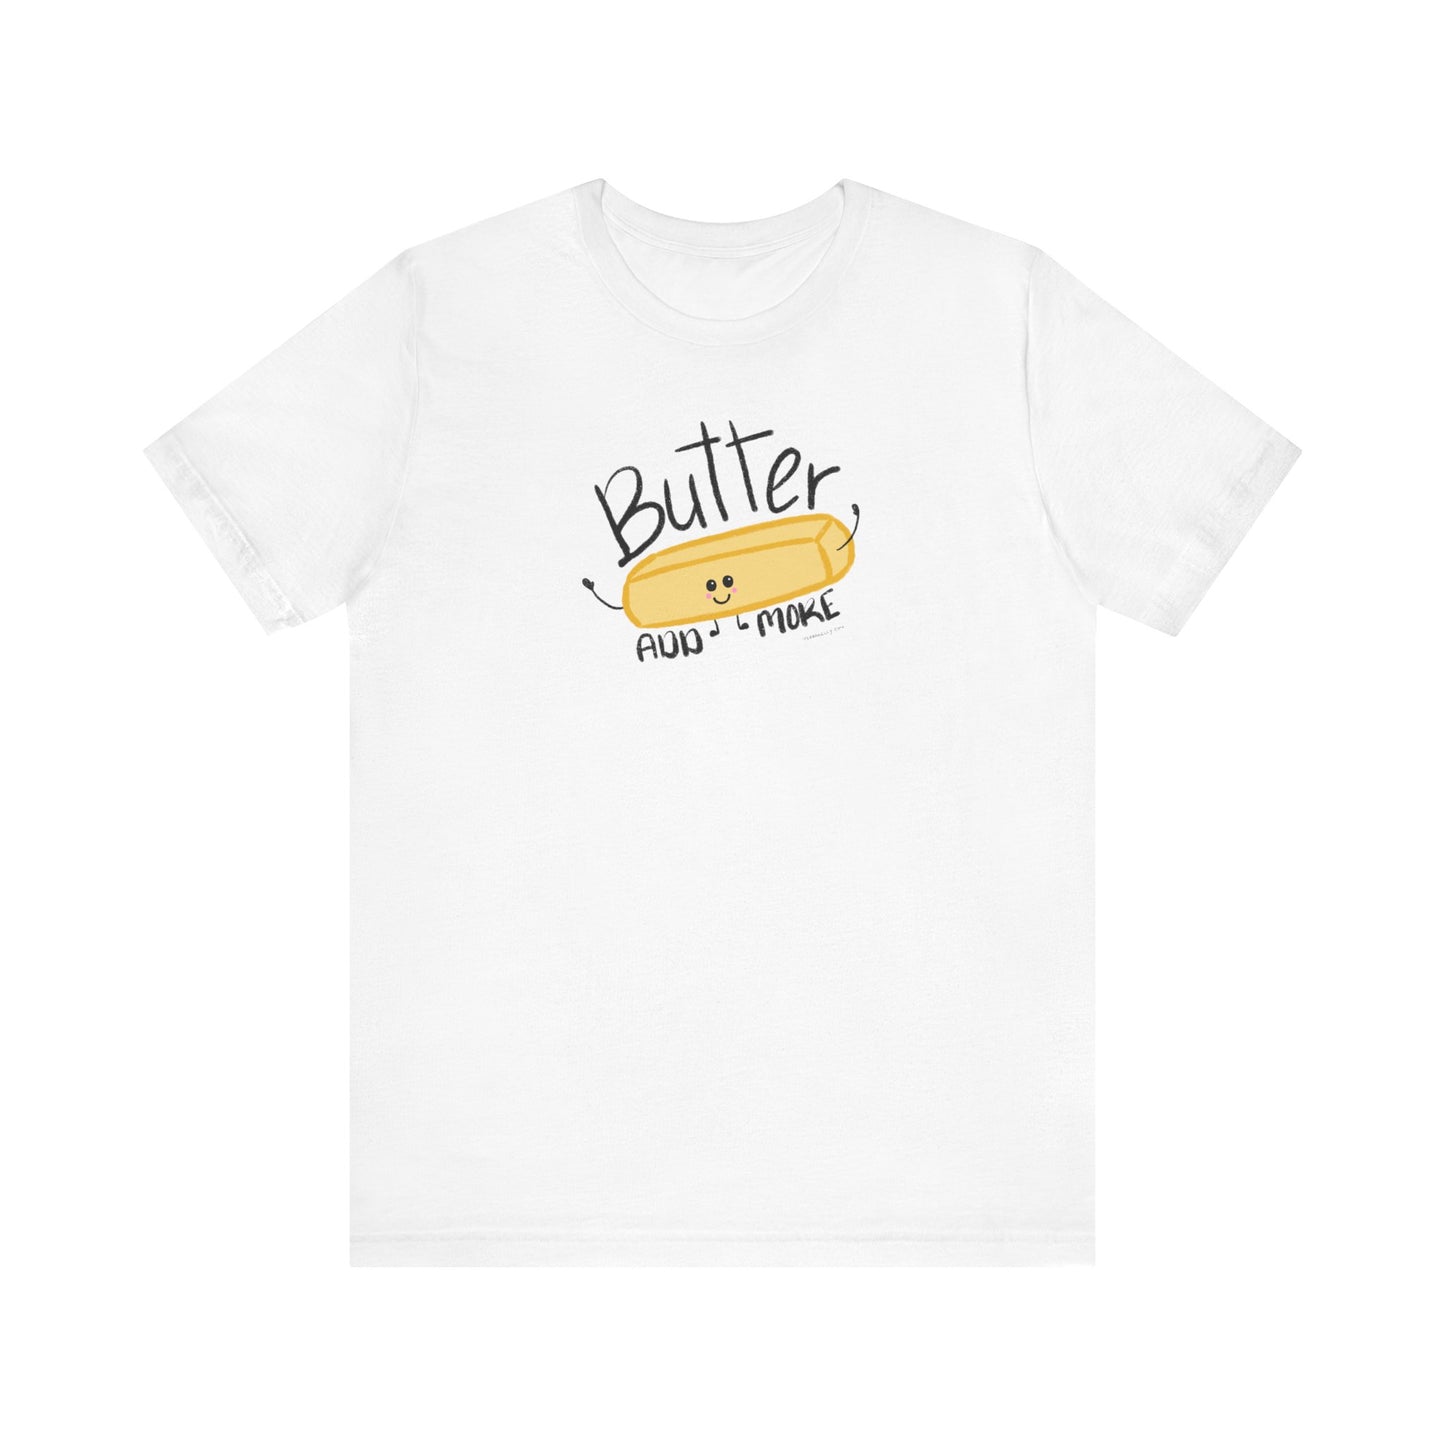 Butter Add More Unisex Jersey Short Sleeve T-shirt | Available in Five Colors | Six Sizes | FREE SHIPPING